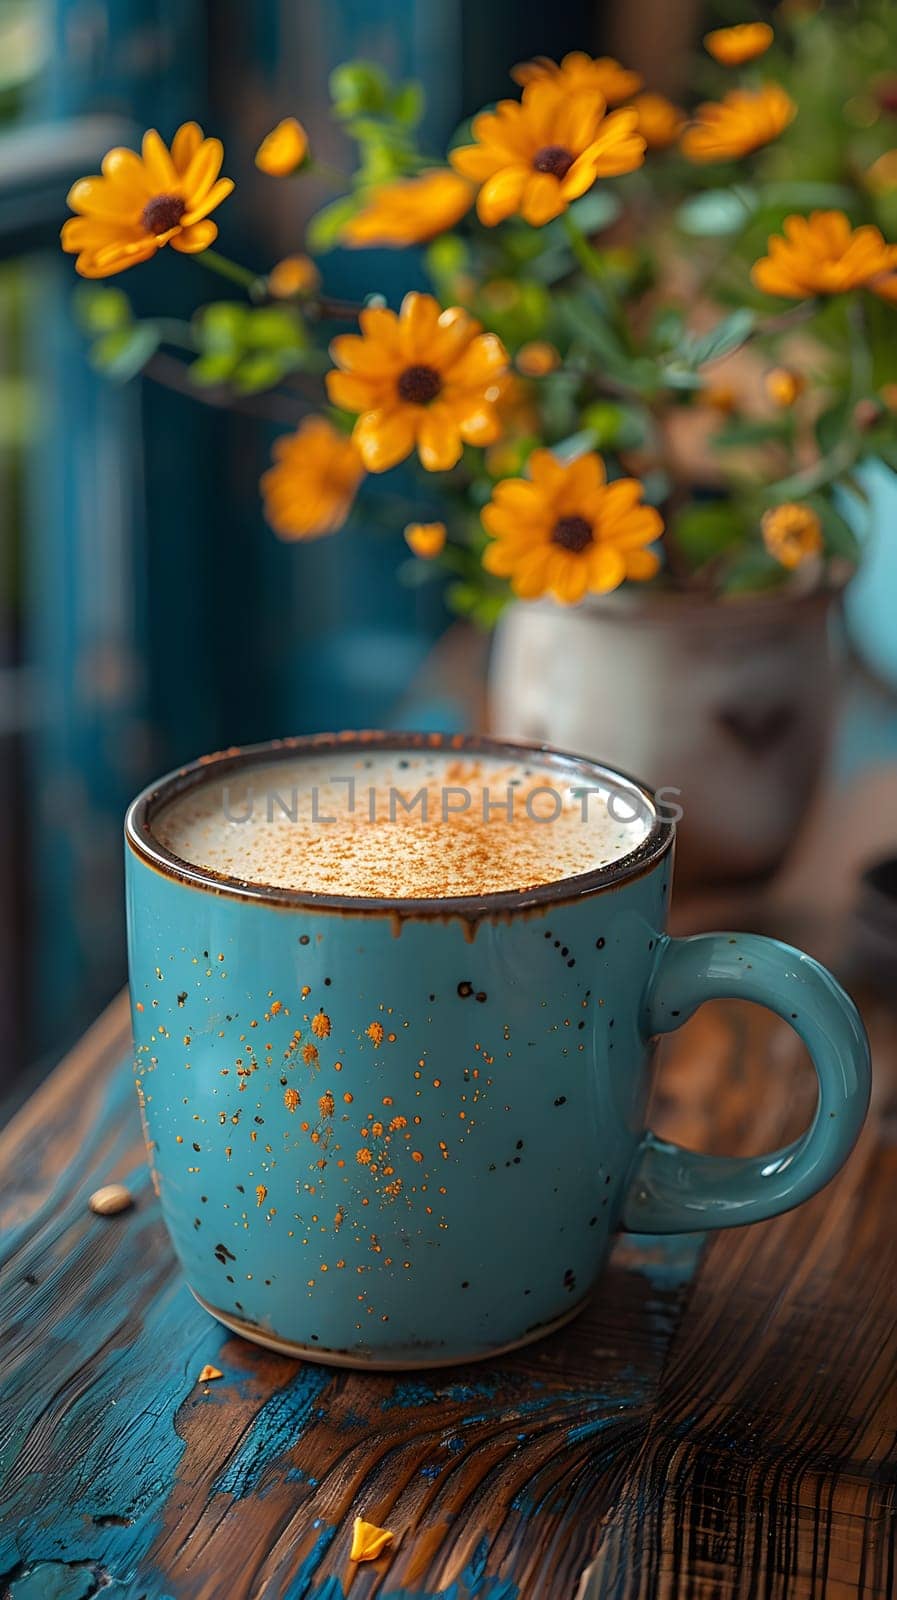 A cup of coffee is placed on a wooden table beside a vase of yellow flowers, creating a beautiful display of drinkware and plant decor